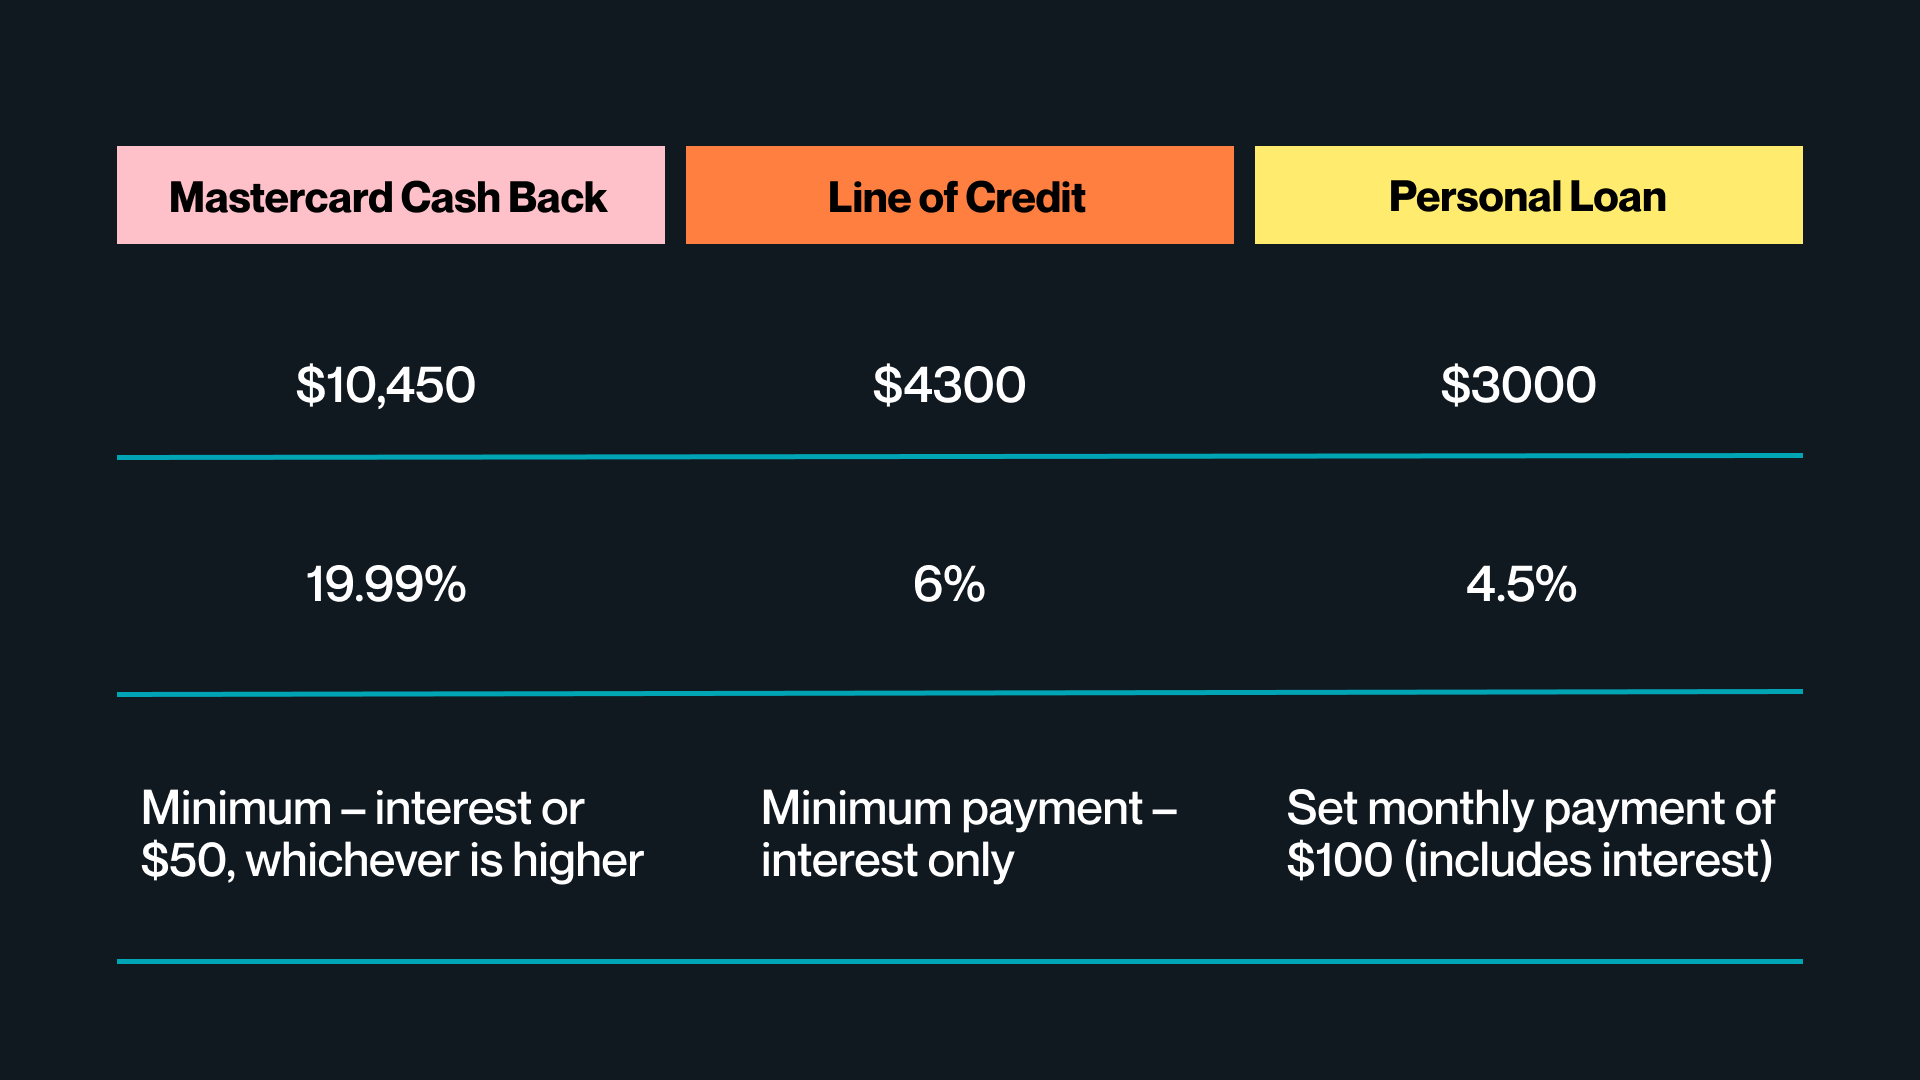 Example of debt based on various lending products